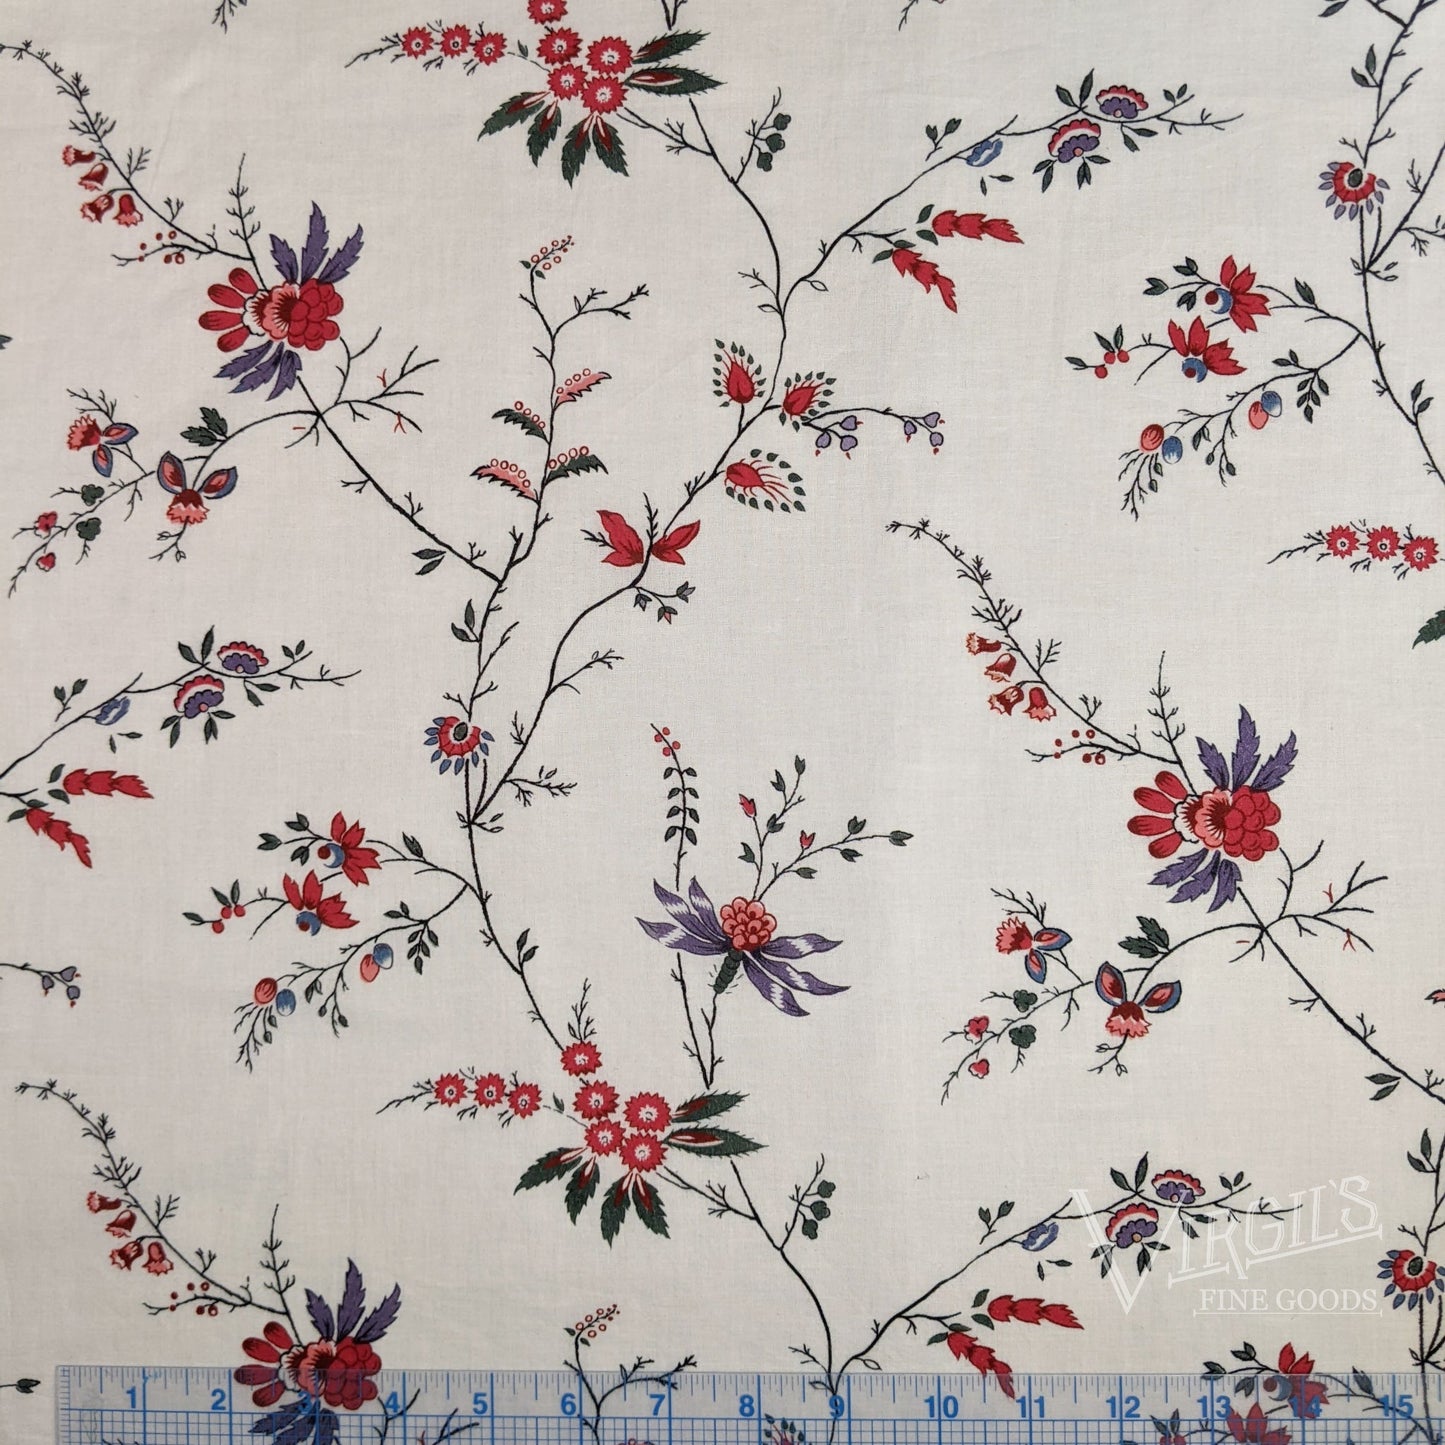 SECONDS & OFFCUTS Seraphina Vines (1770-1780 Inspired) Cotton Batiste Fabric